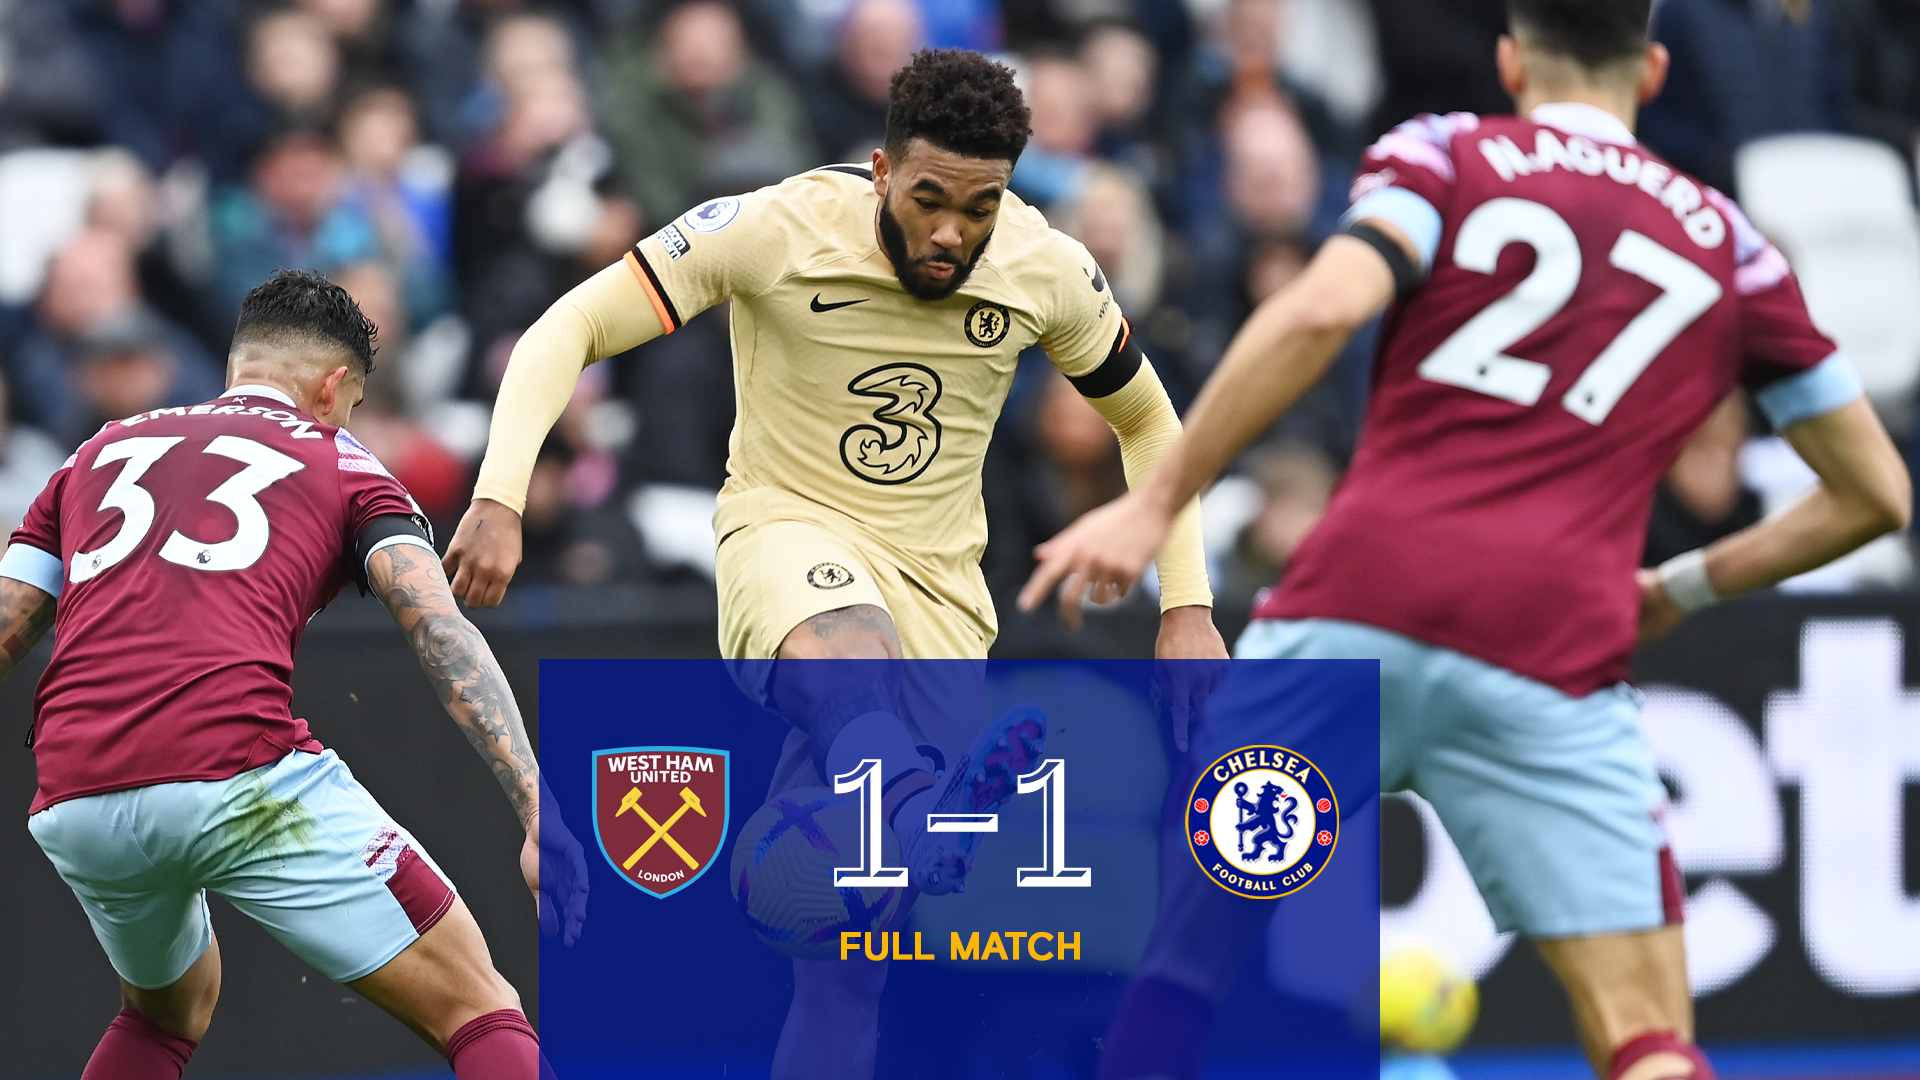 Full Match West Ham 1-1 Chelsea Video Official Site Chelsea Football Club